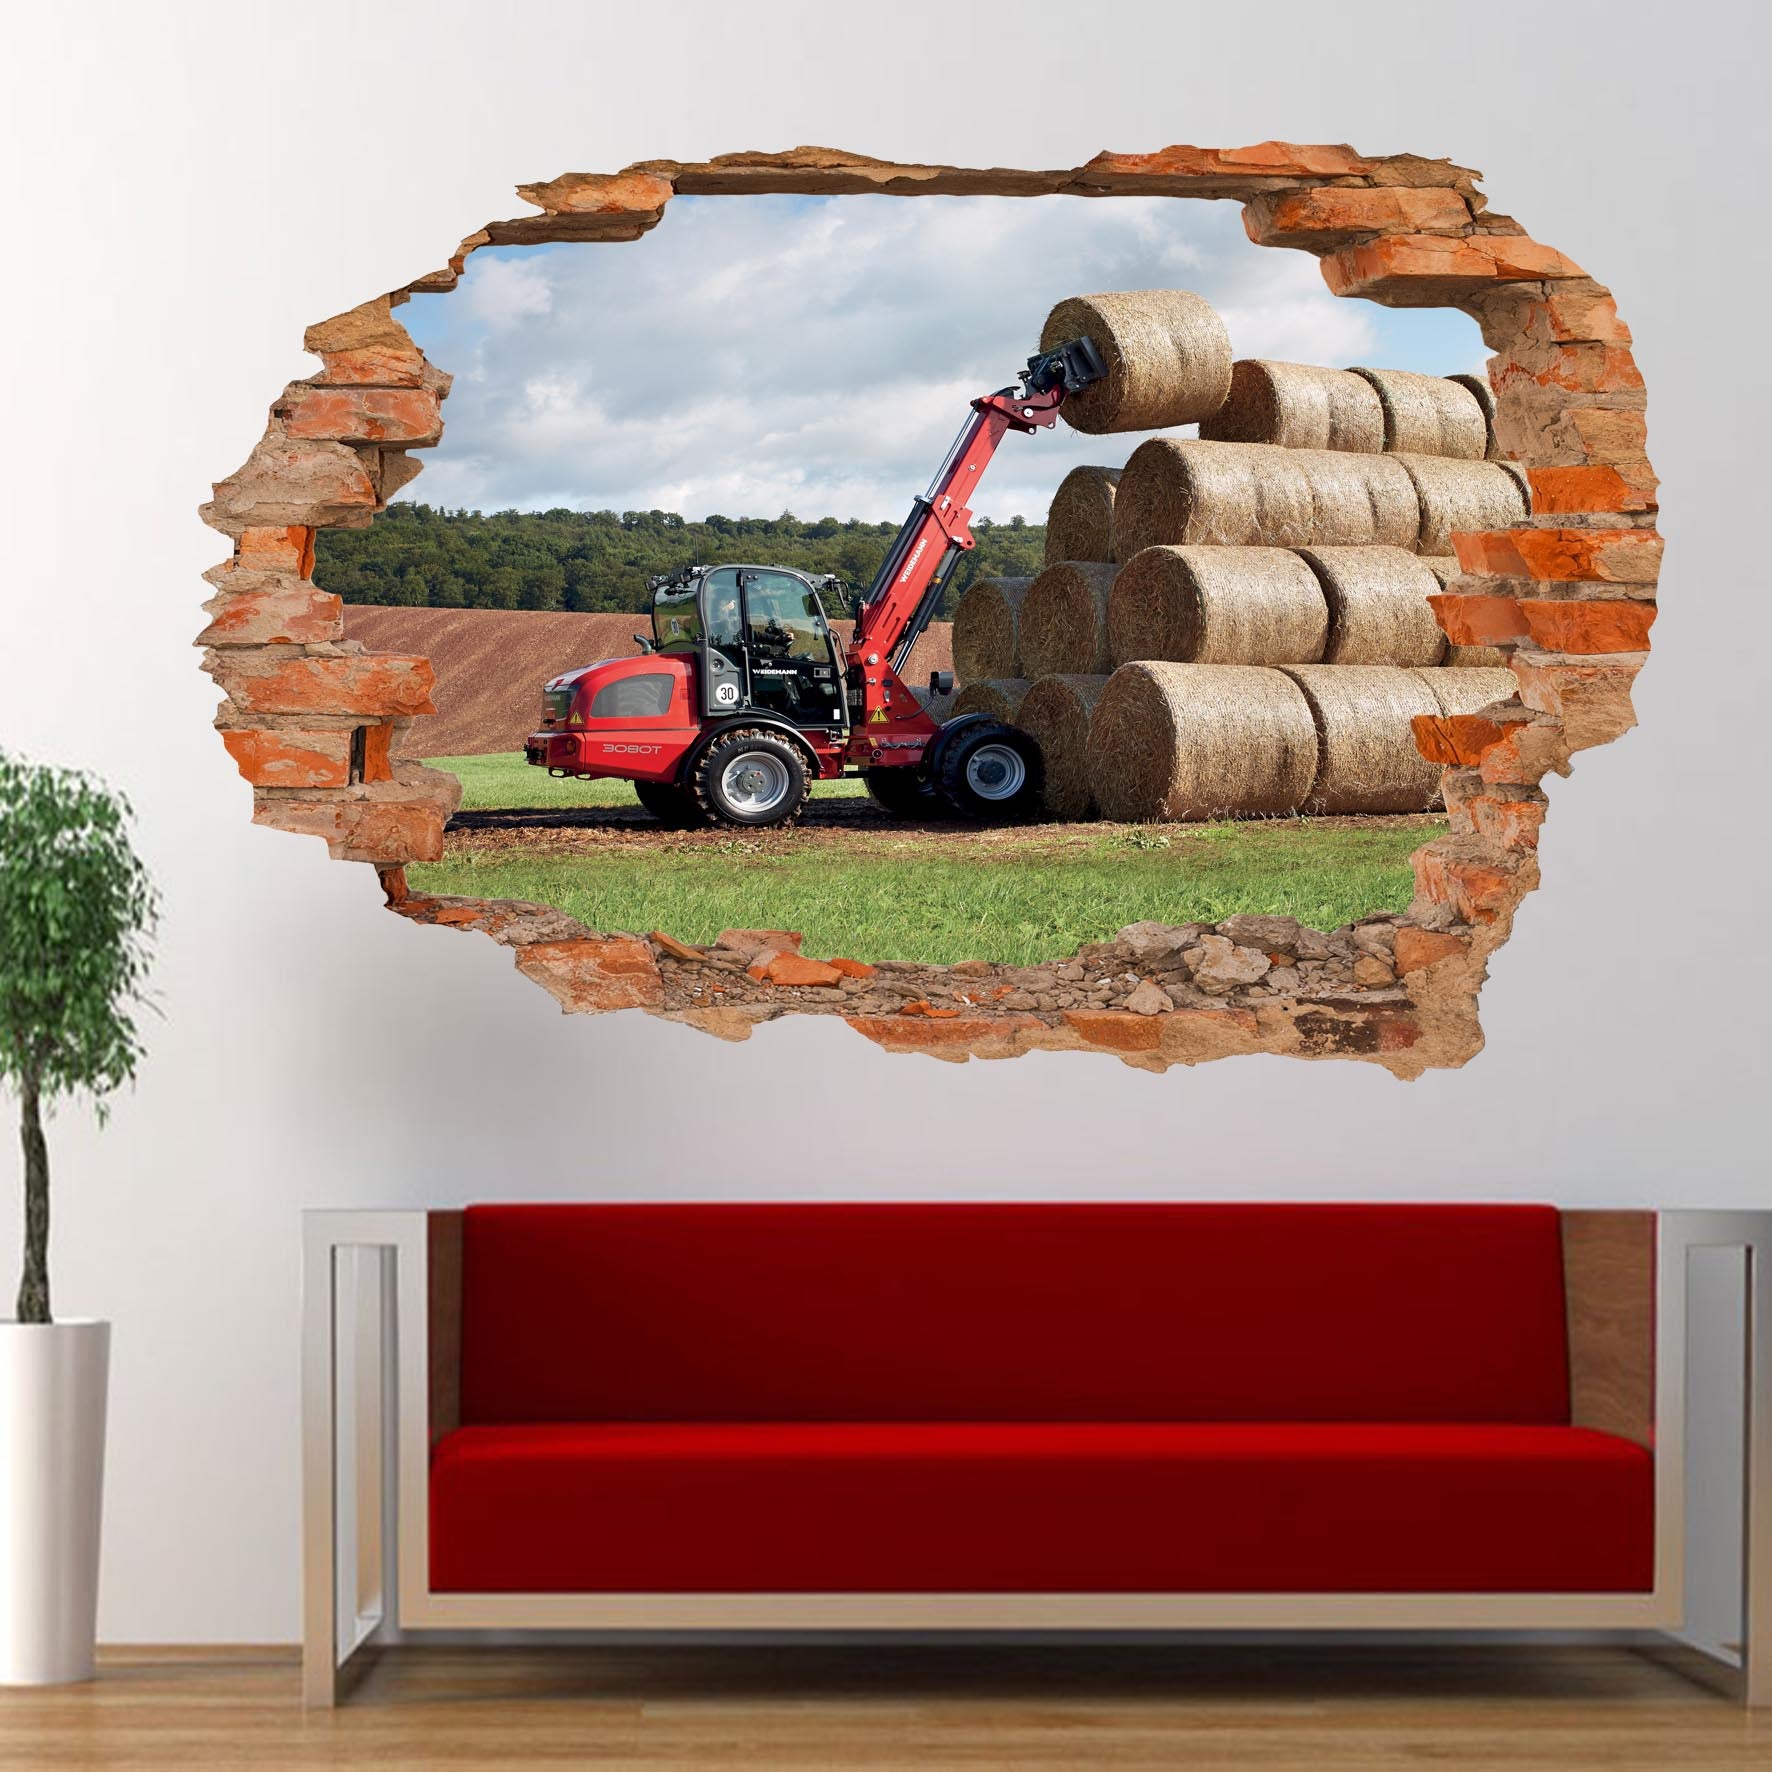 AGRICULTURAL FARMING MACHINERY WEIDERMANN WALL STICKERS